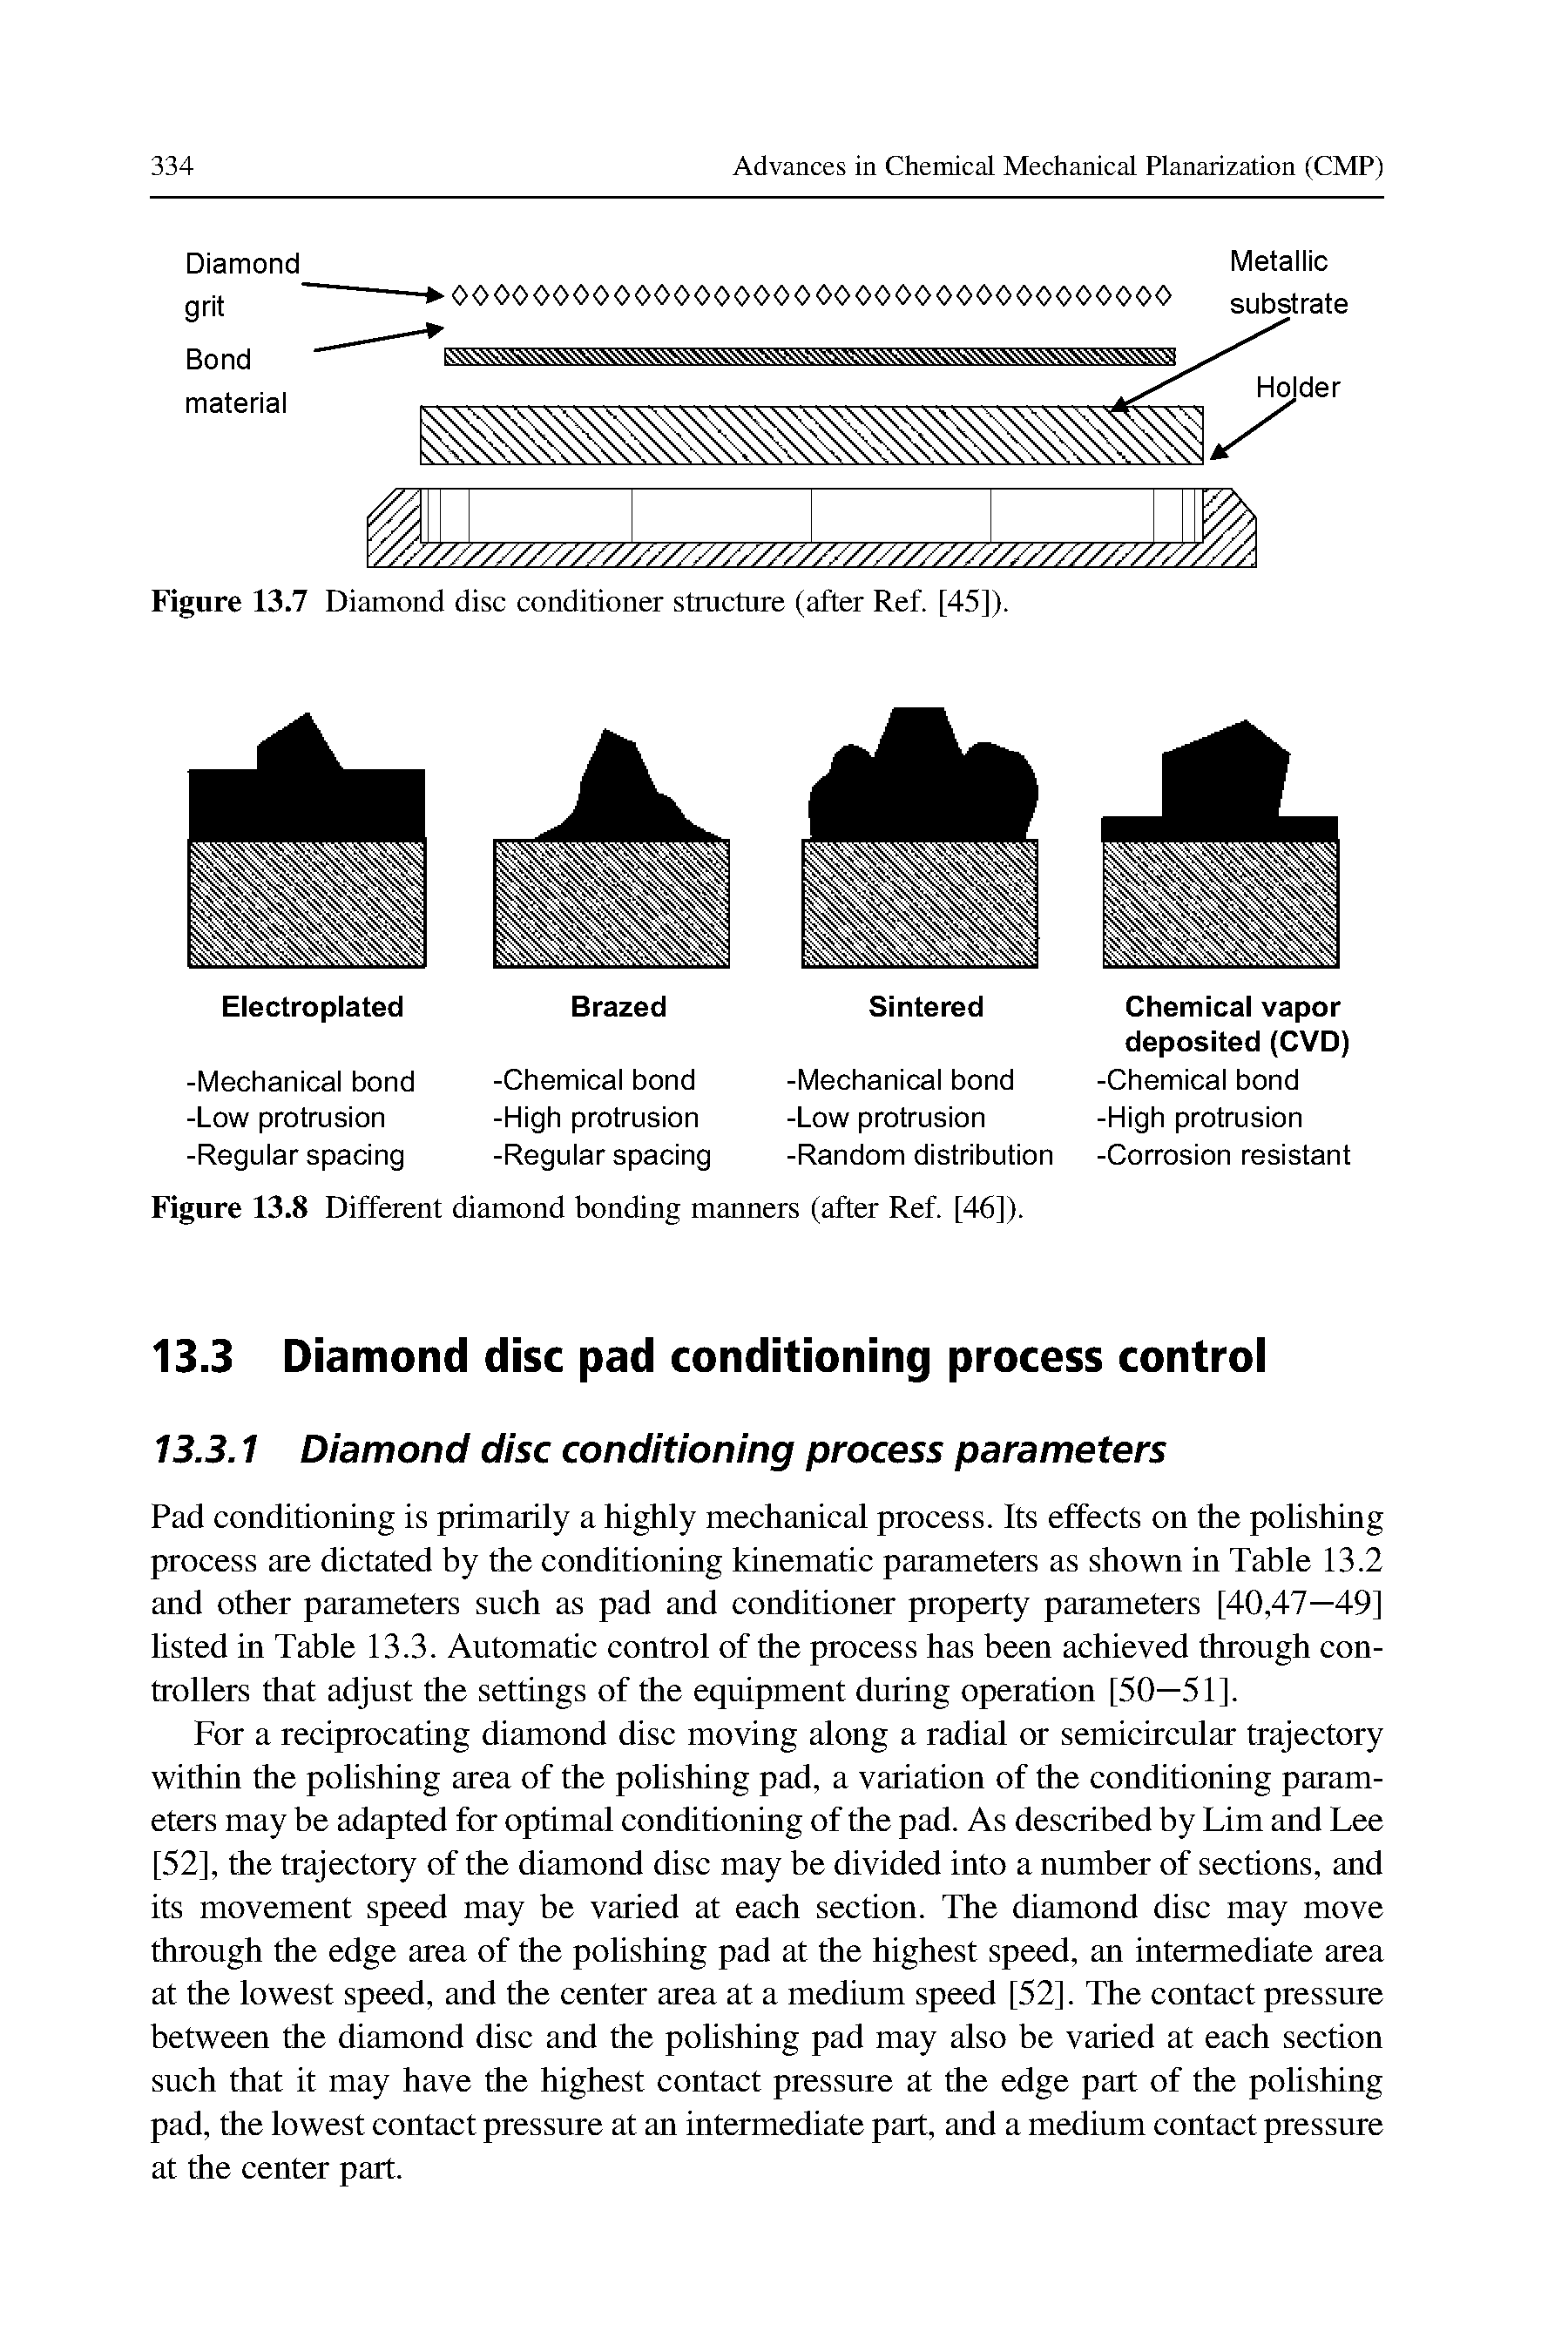 Figure 13.7 Diamond disc conditioner structure (after Ref. [45]).